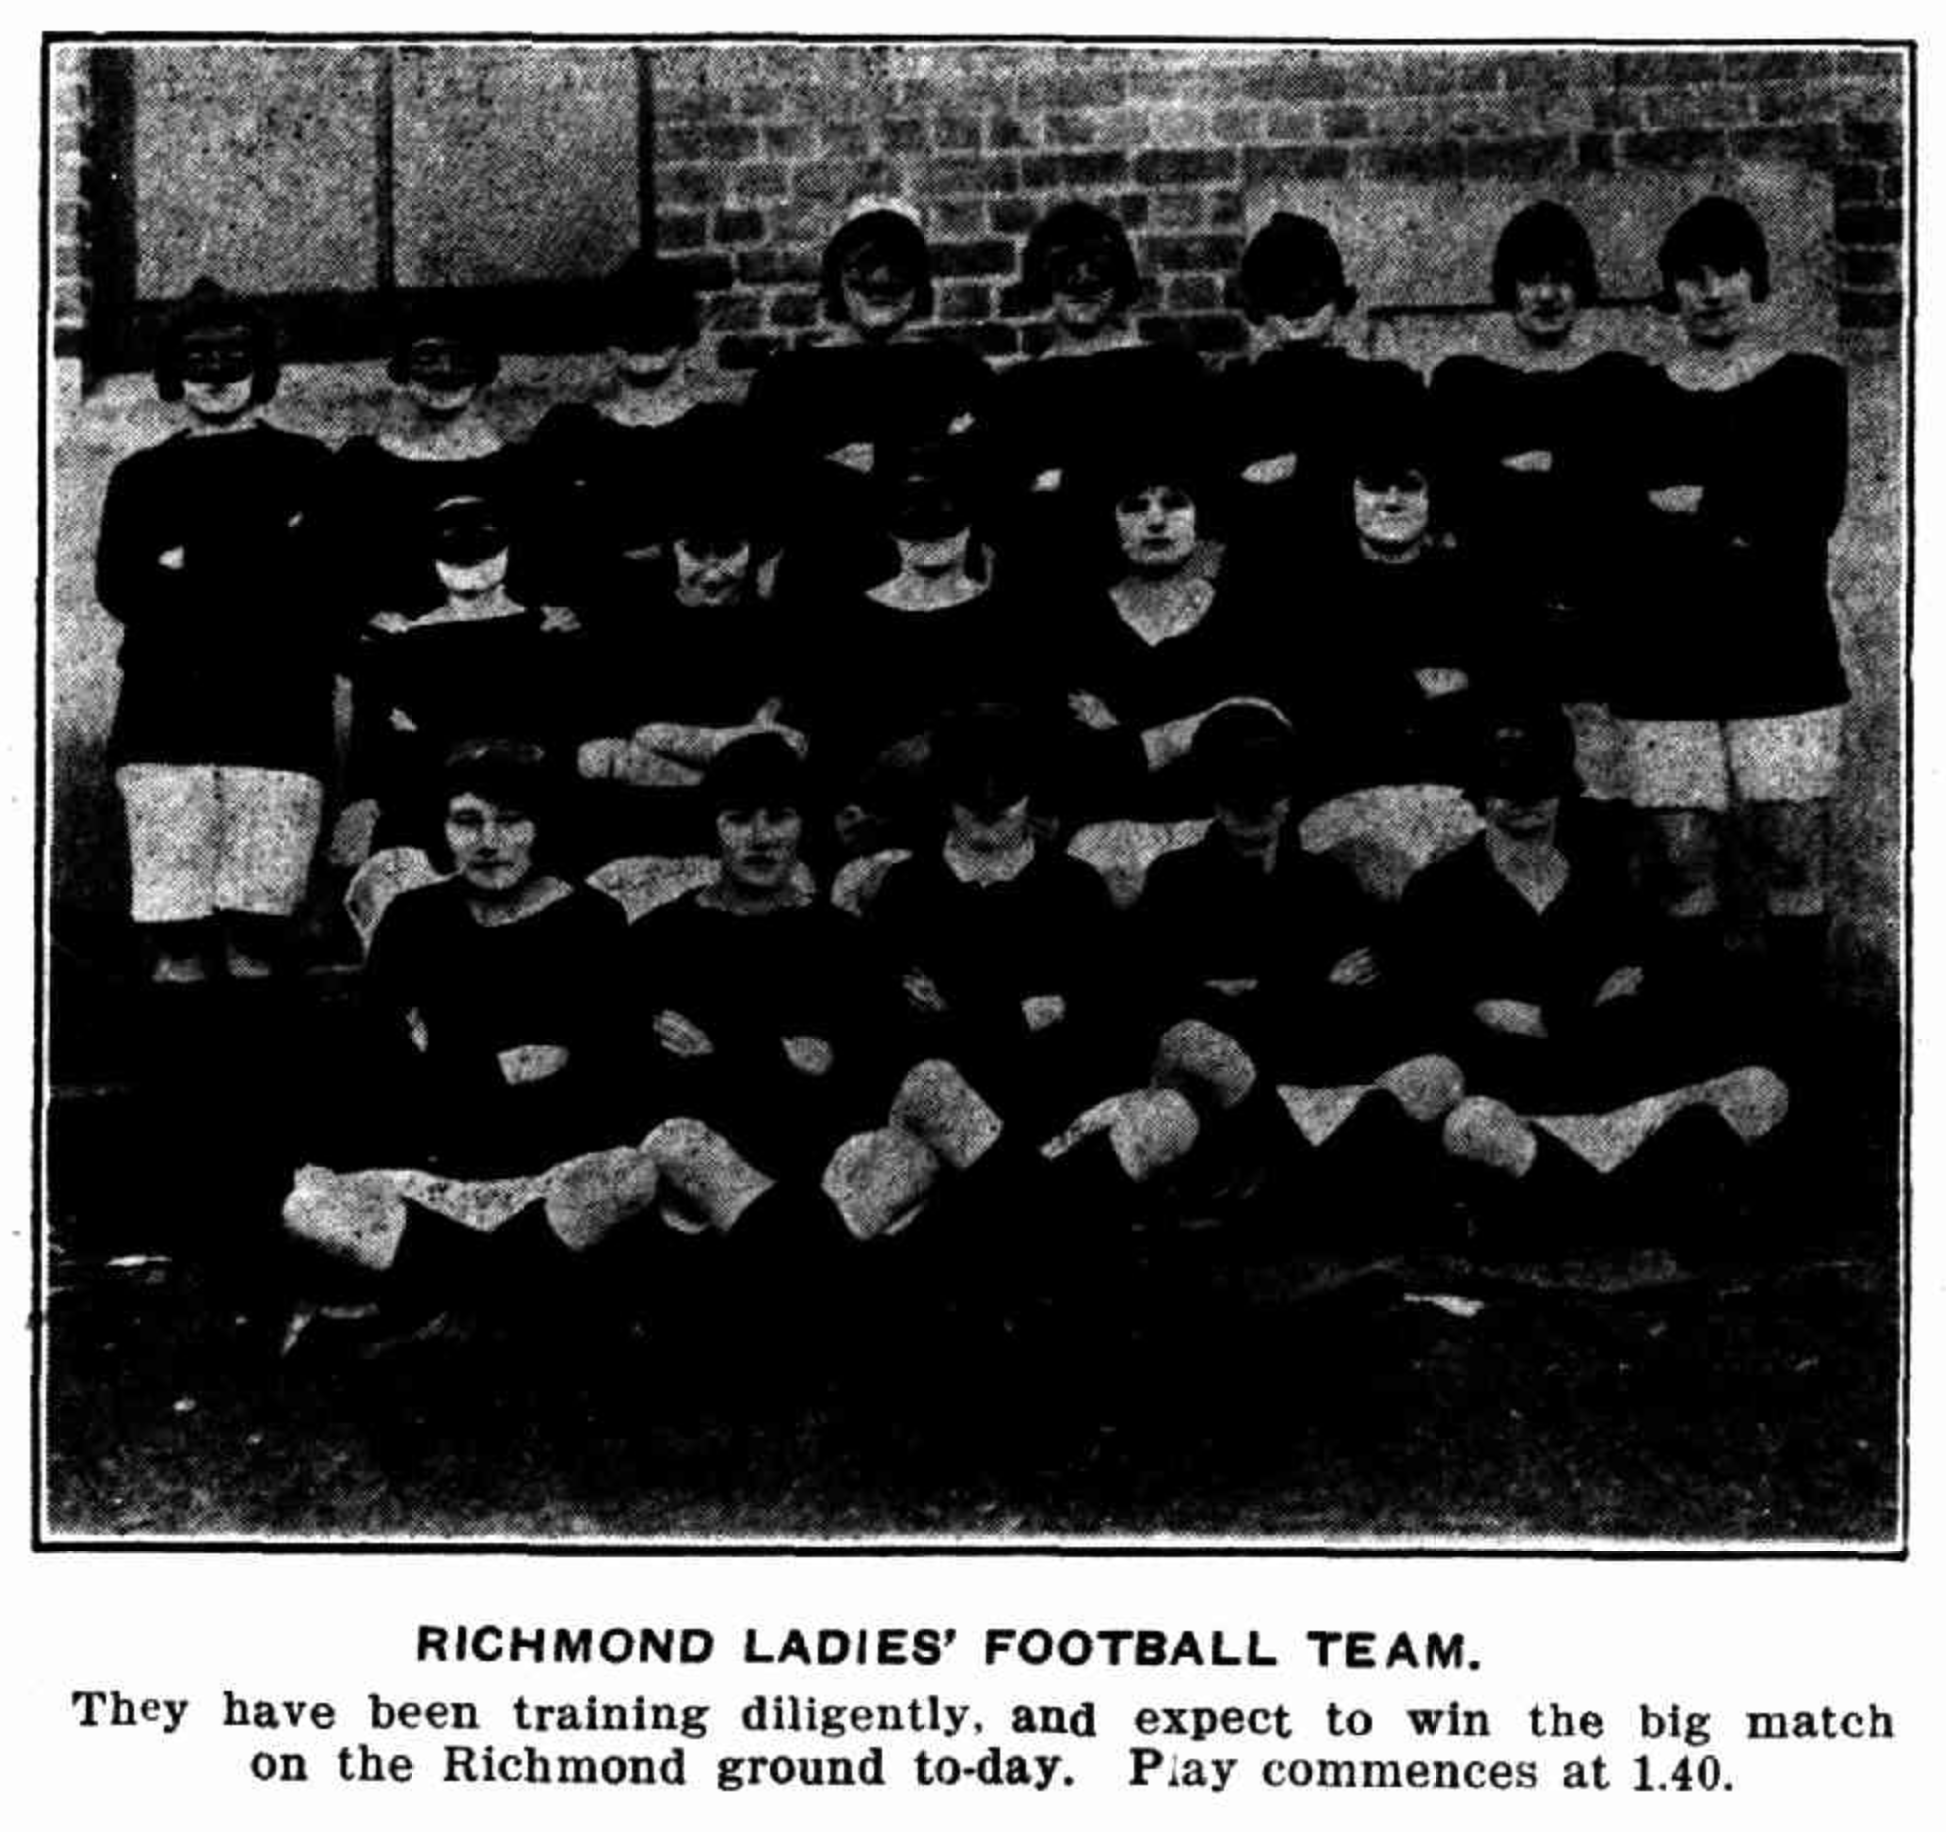 newspaper photo of the Richmond women's football team. The women are dressed in a costume including masks and knee-high socks.